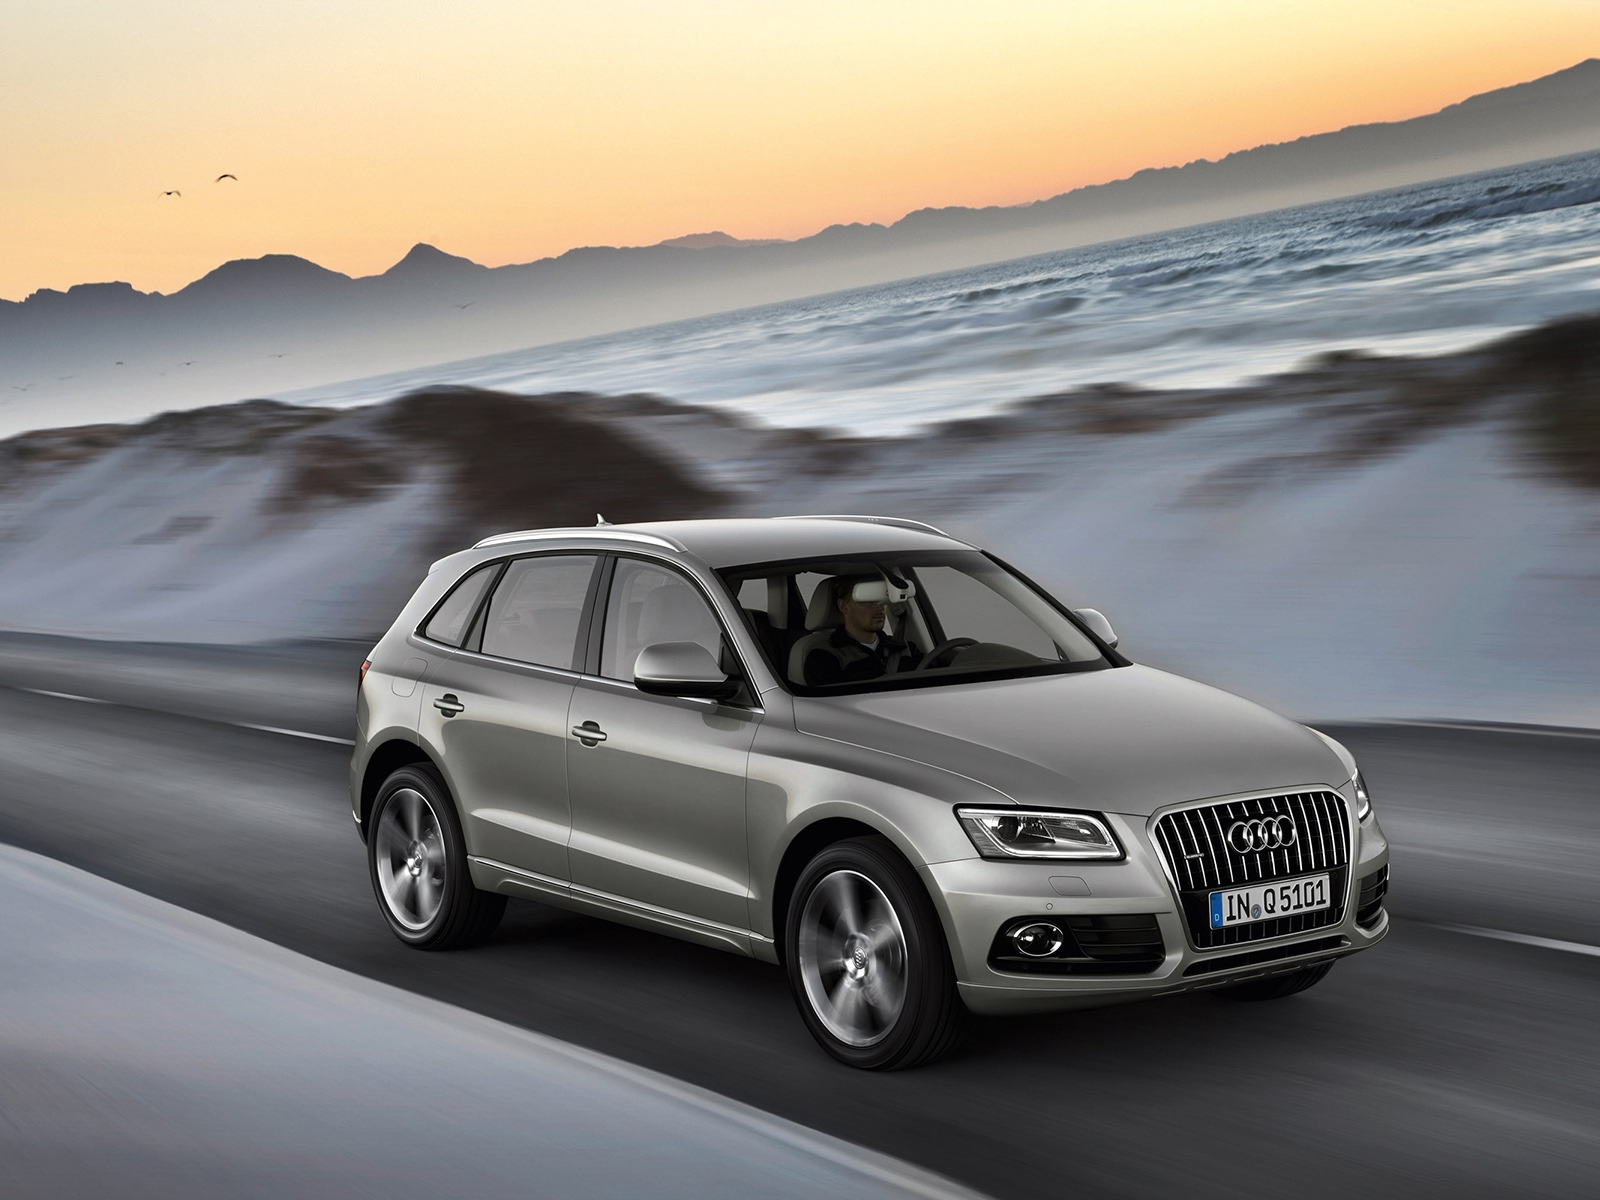 2013 Audi Q5 for 1600 x 1200 resolution